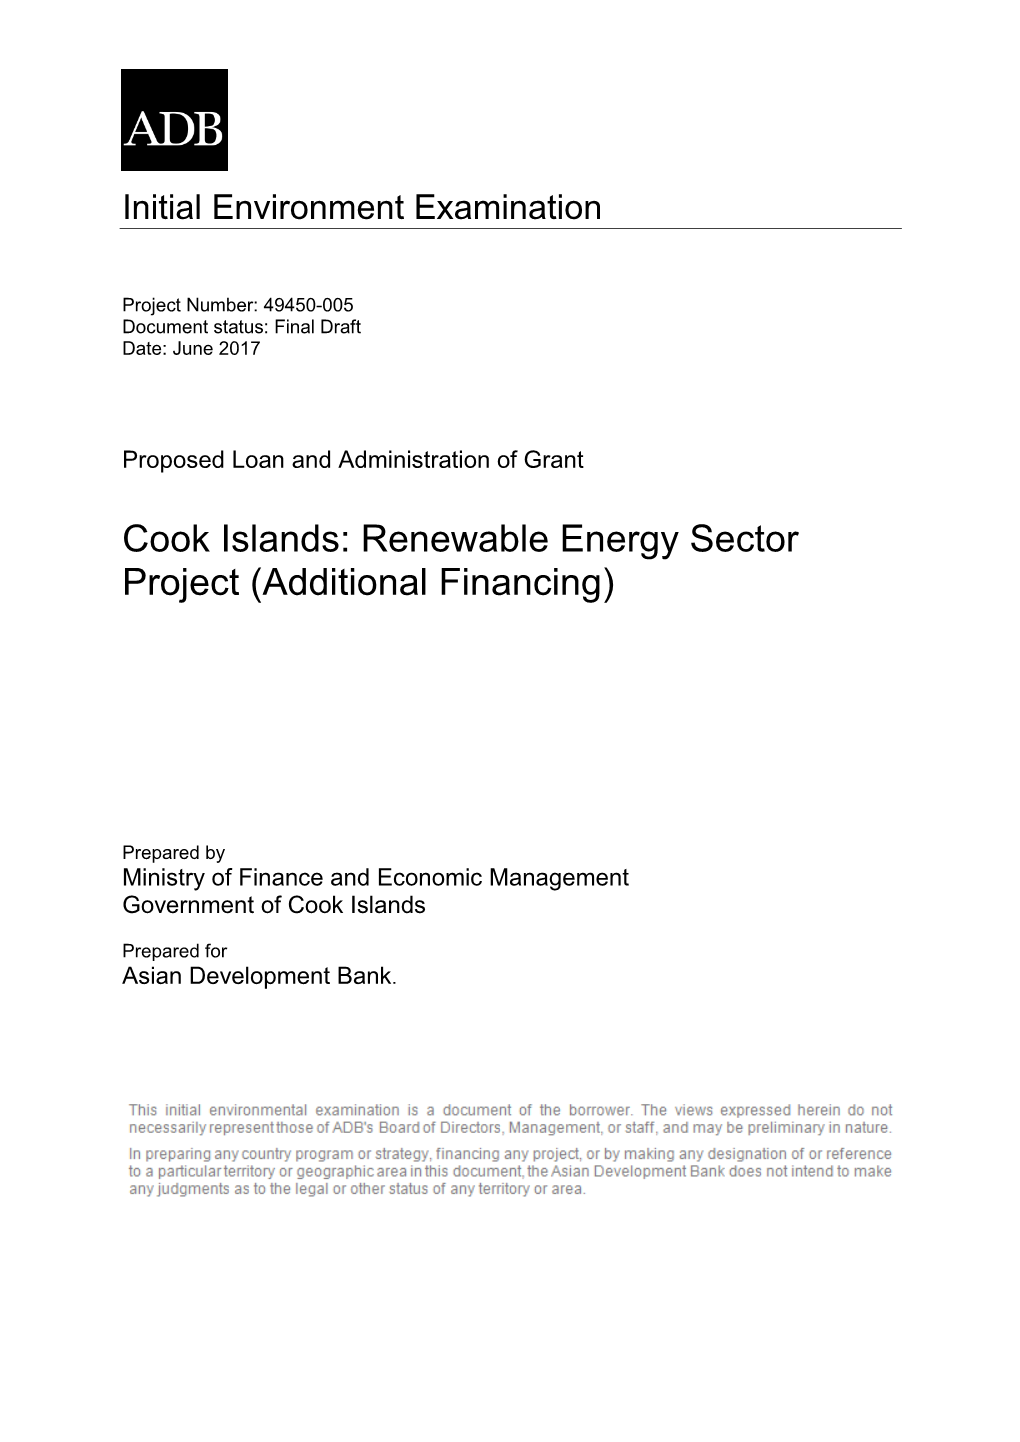 Renewable Energy Sector Project (Additional Financing)